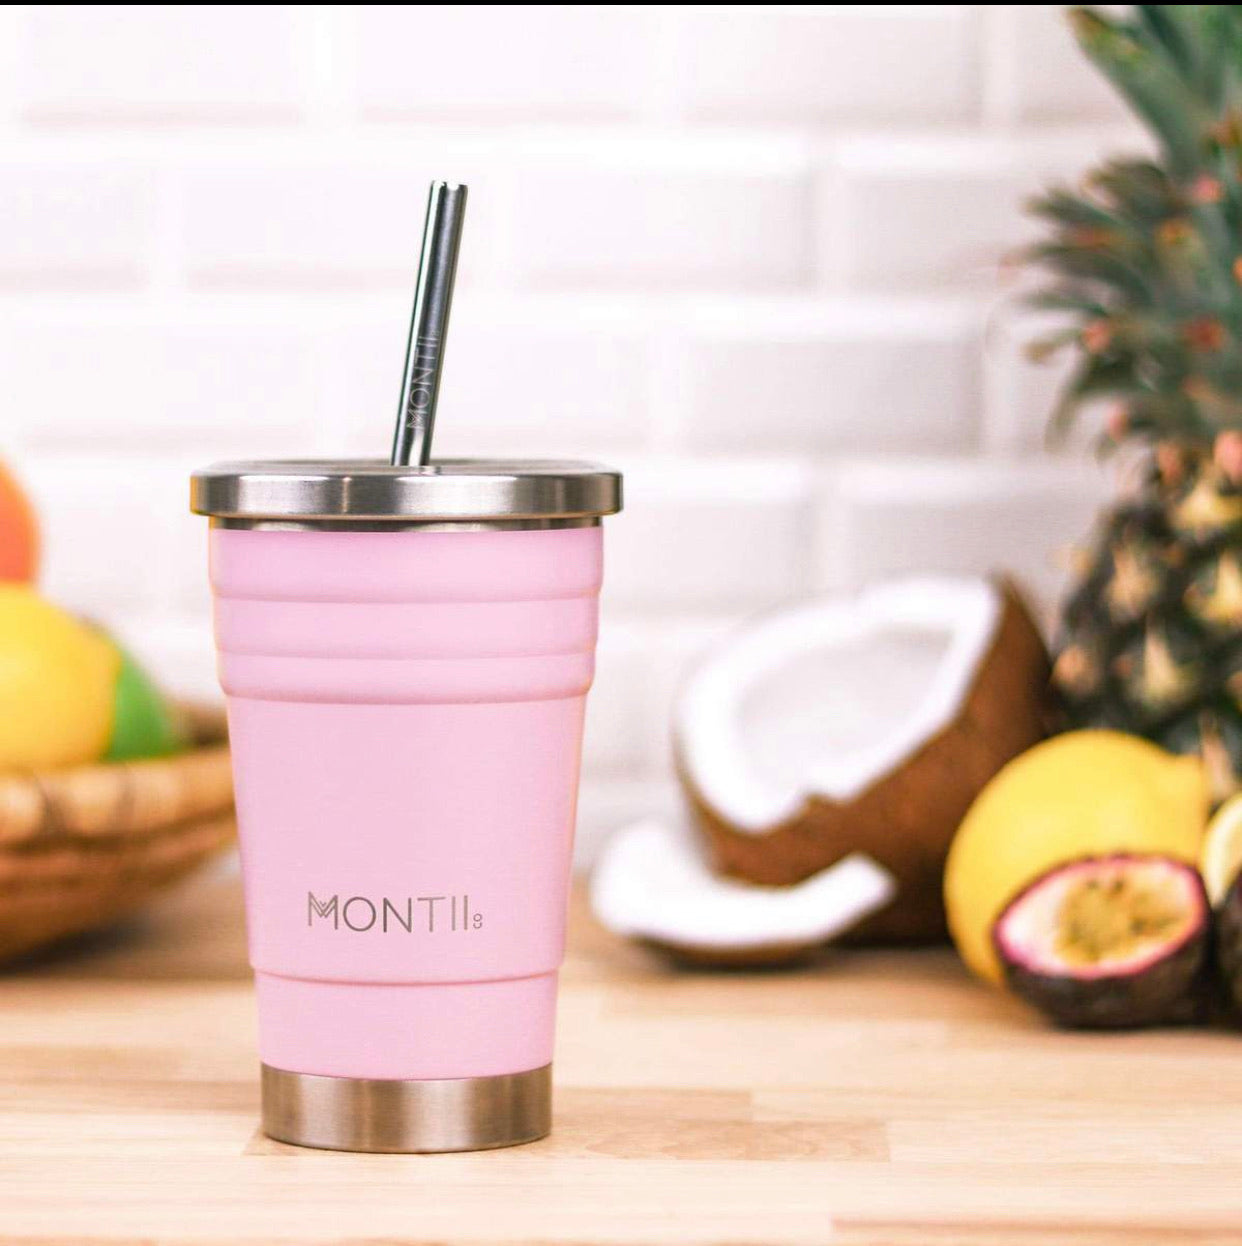 Montii Smoothie Cup Vacuum Insulated Stainless Steel 450ml Keeps cold for  6hrs BPA FREE Swipe to see available colors #smoothie…